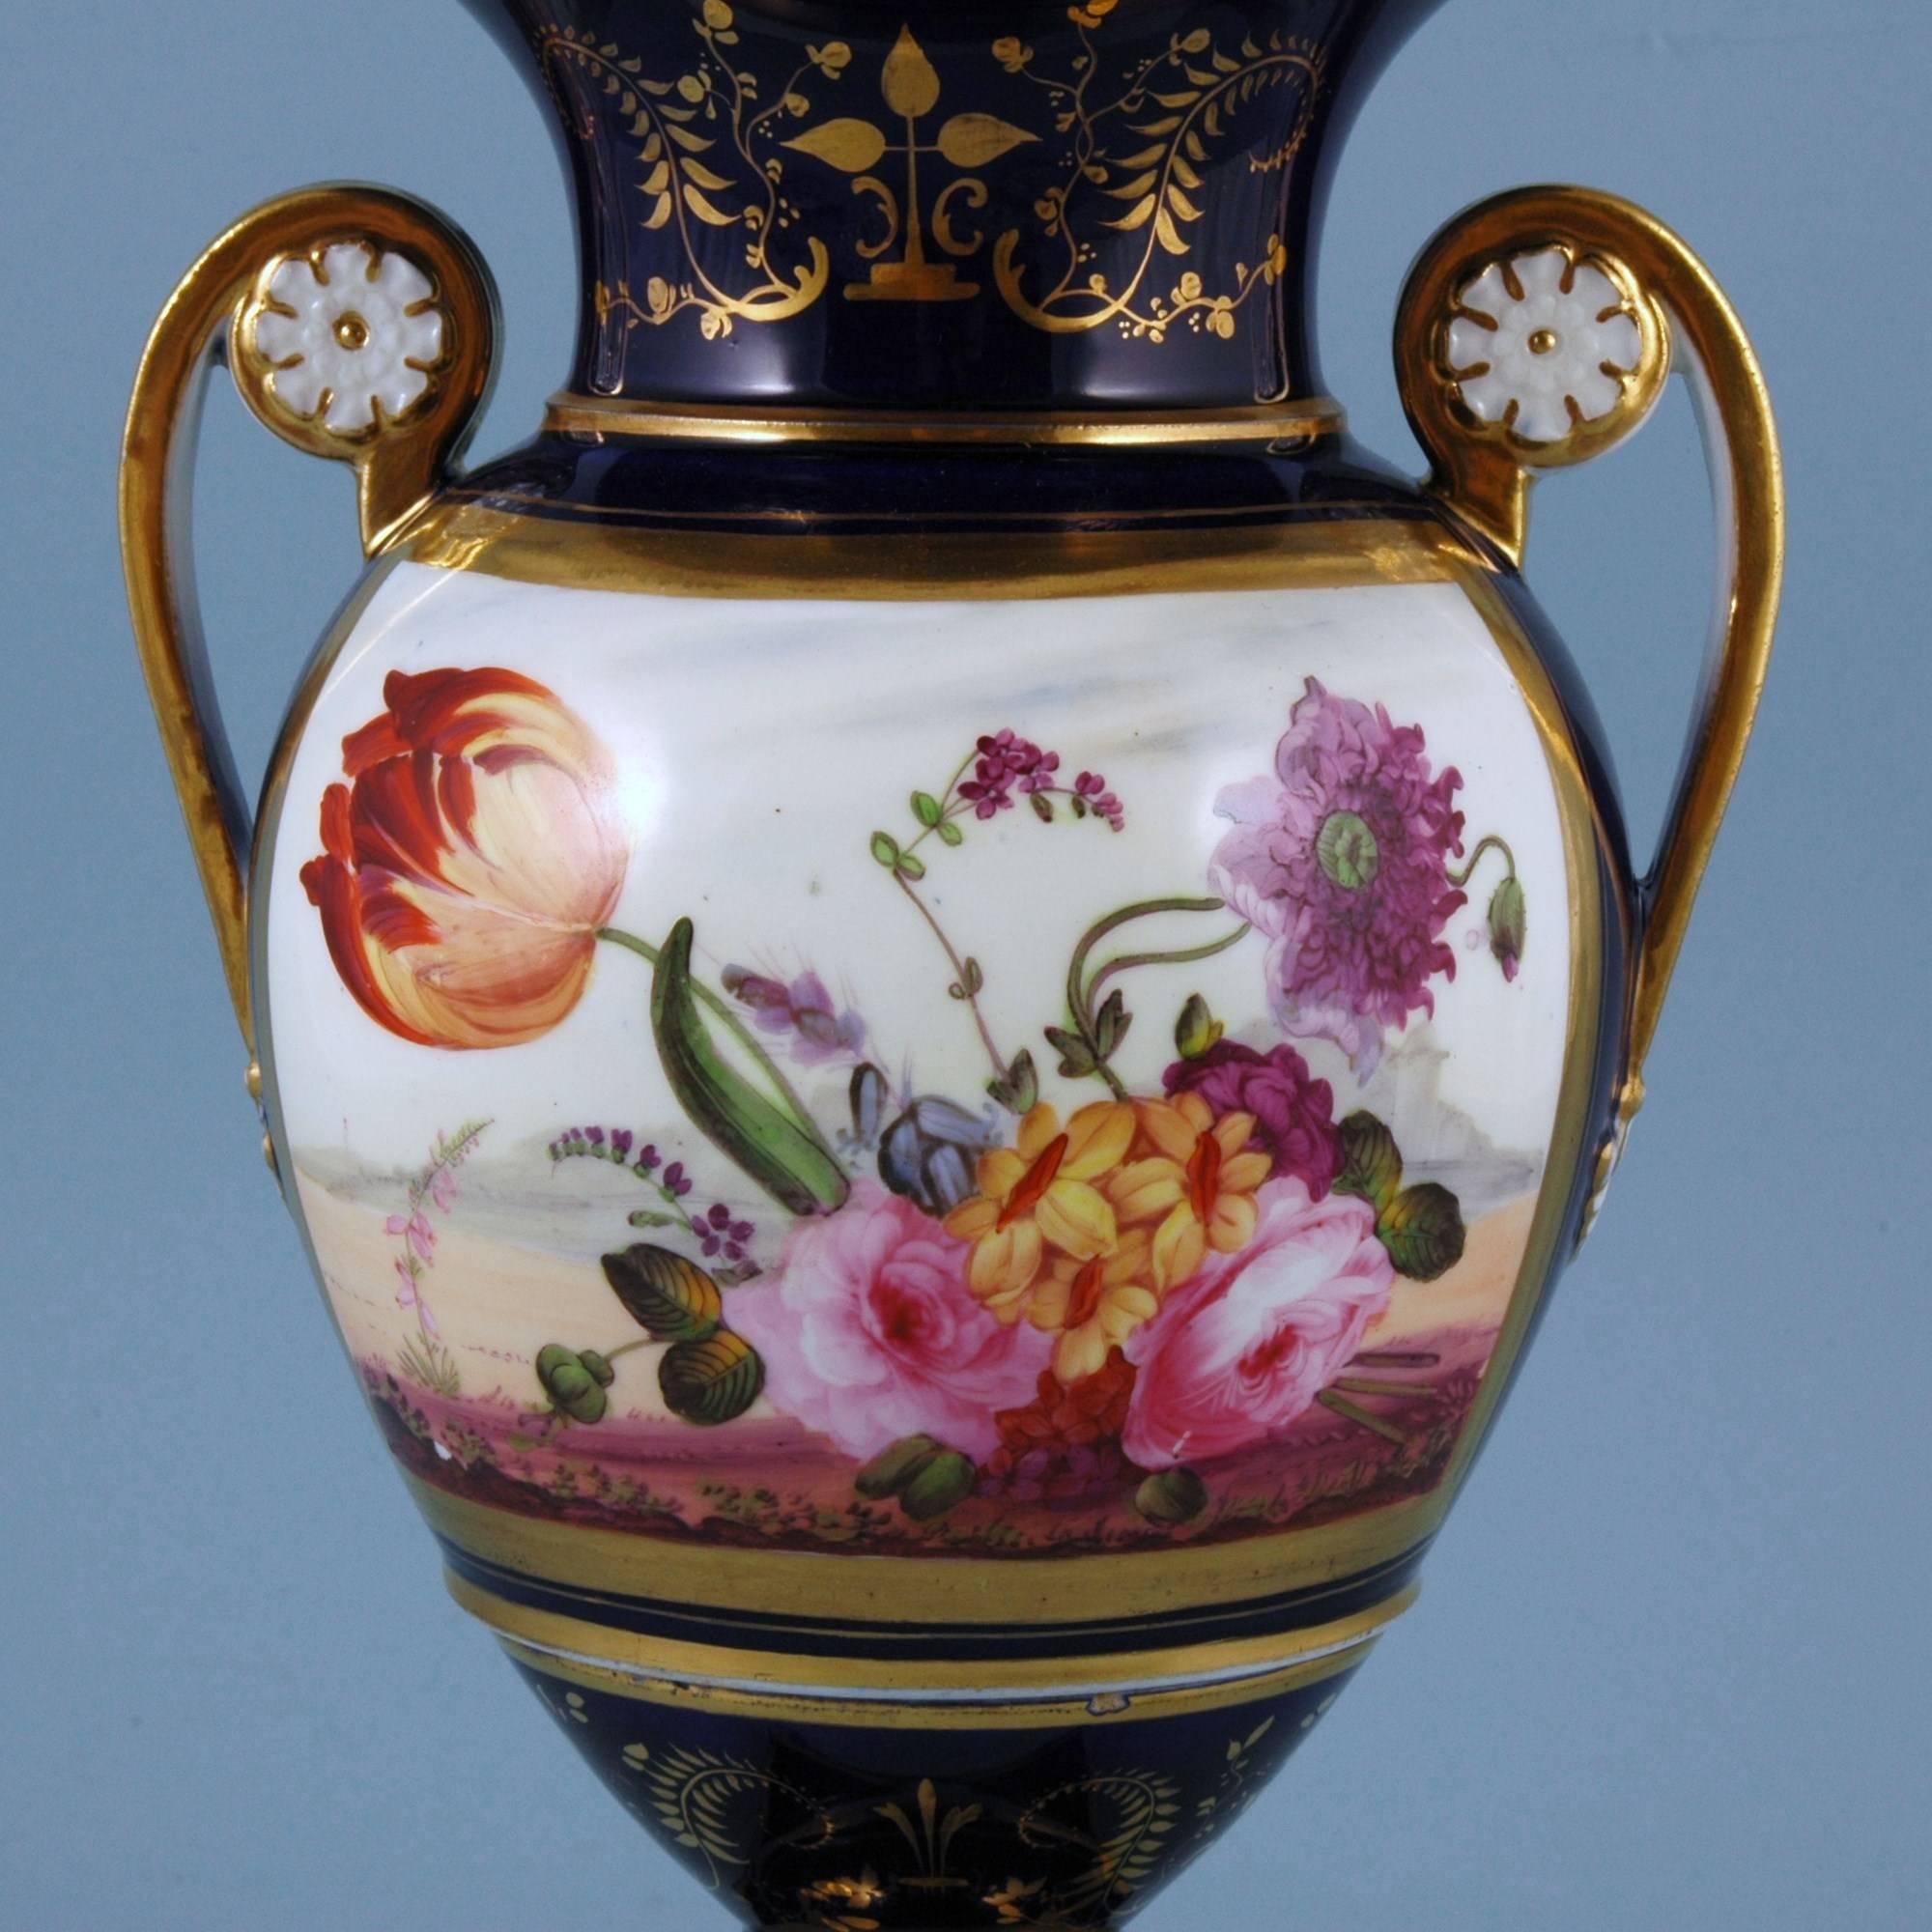 English porcelain botanical blue ground vase,
Coalport,
circa 1825

The Coalport porcelain vase is painted with a large central panel of flowers including a tulip on a blue ground which is highlighted in gold.
 